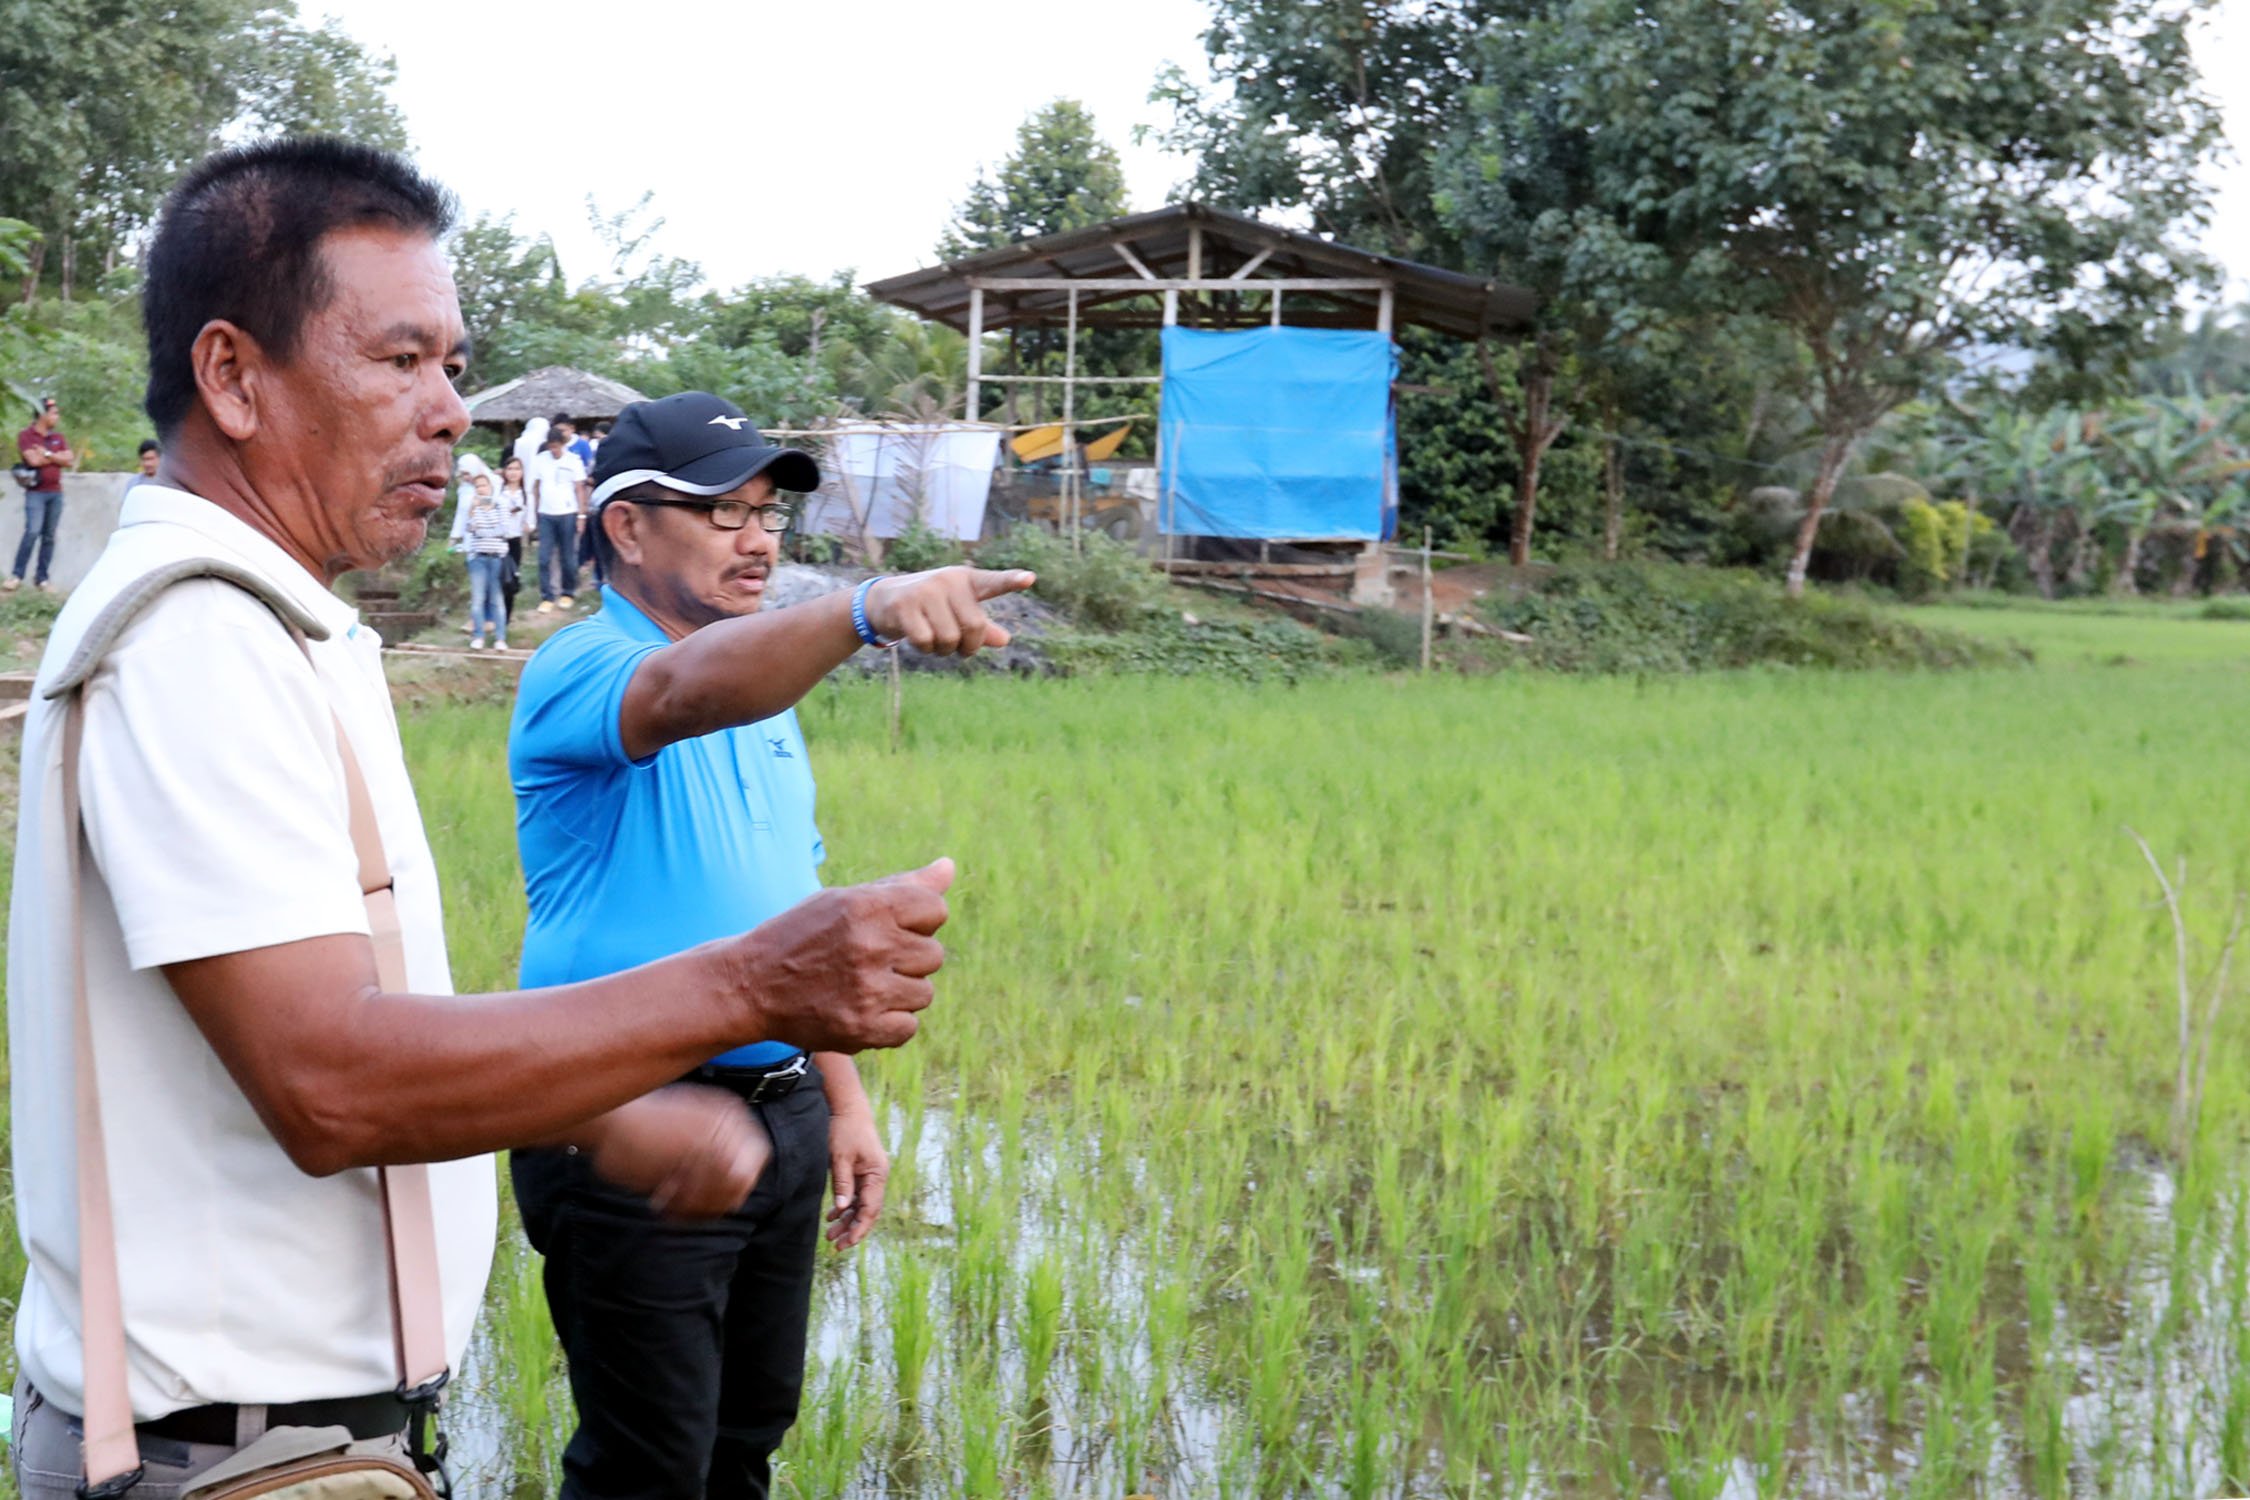 DA Chief visits farm owned by former MNLF commander